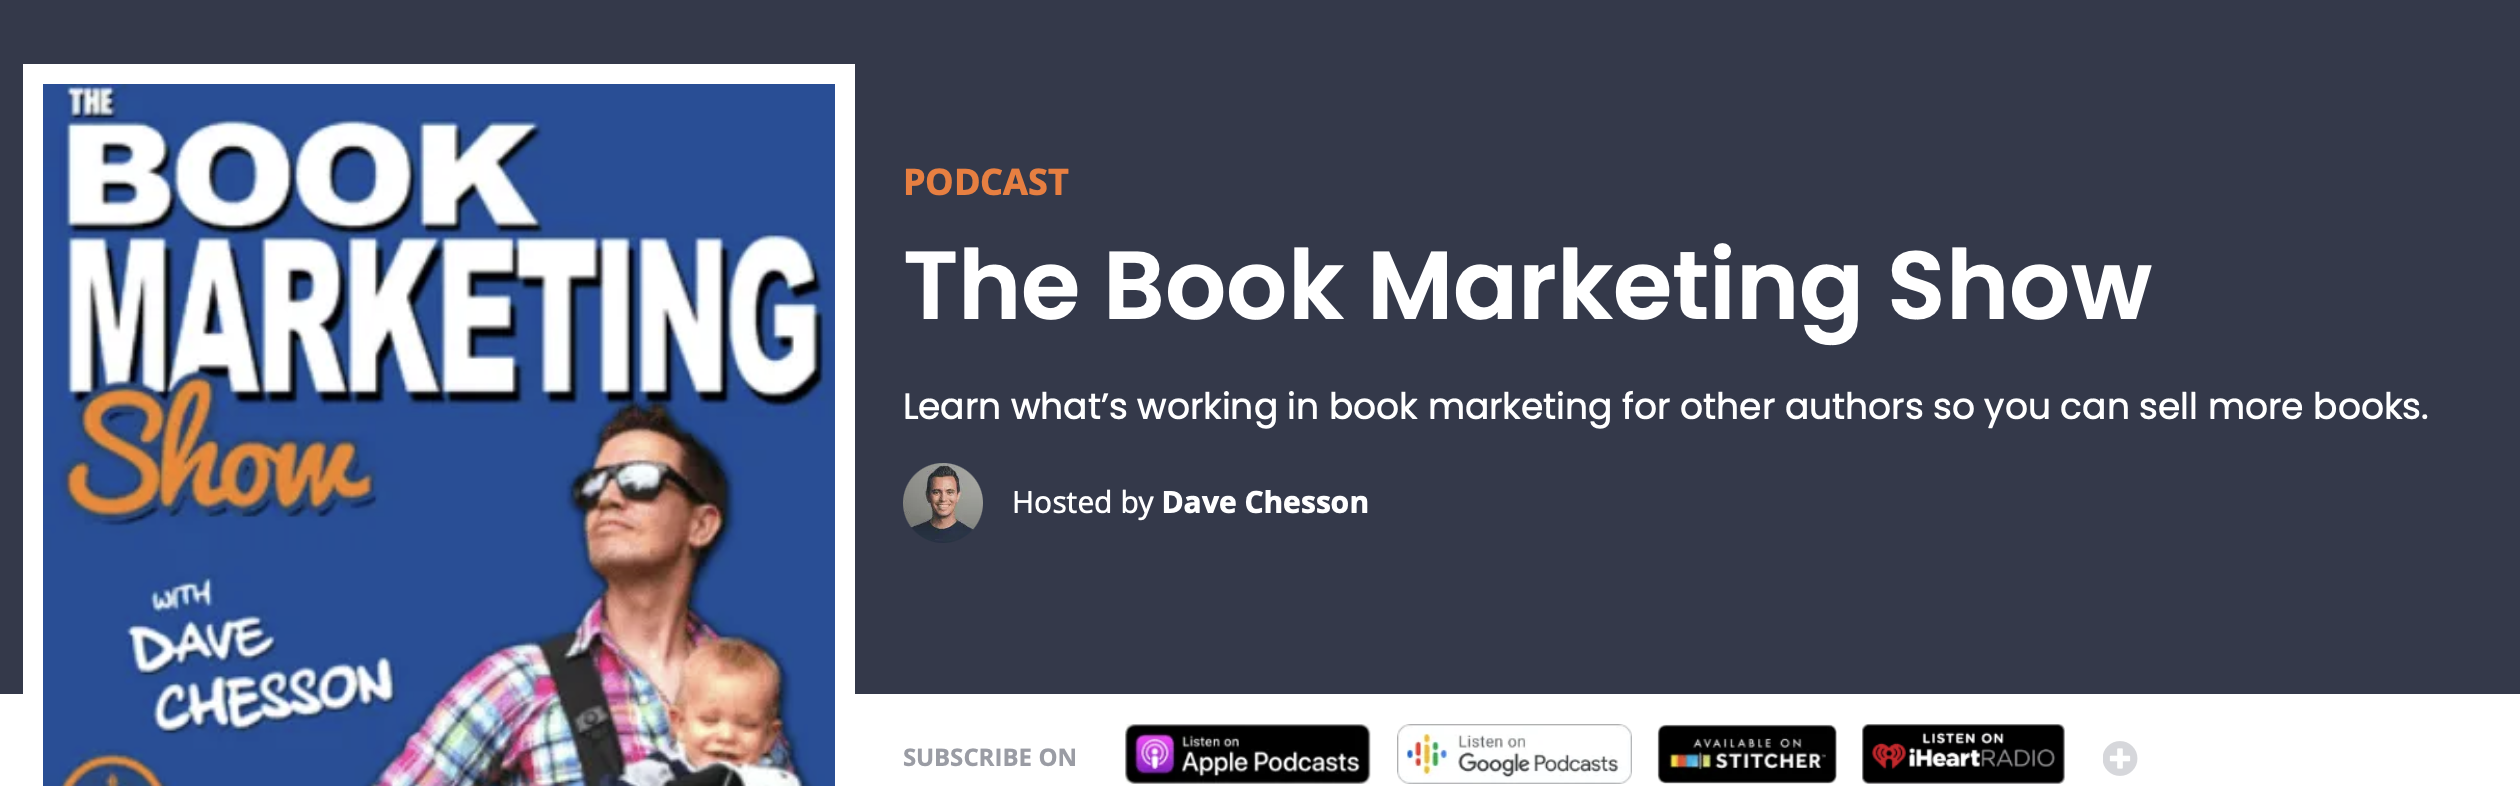 podcasts for authors the book marketing show